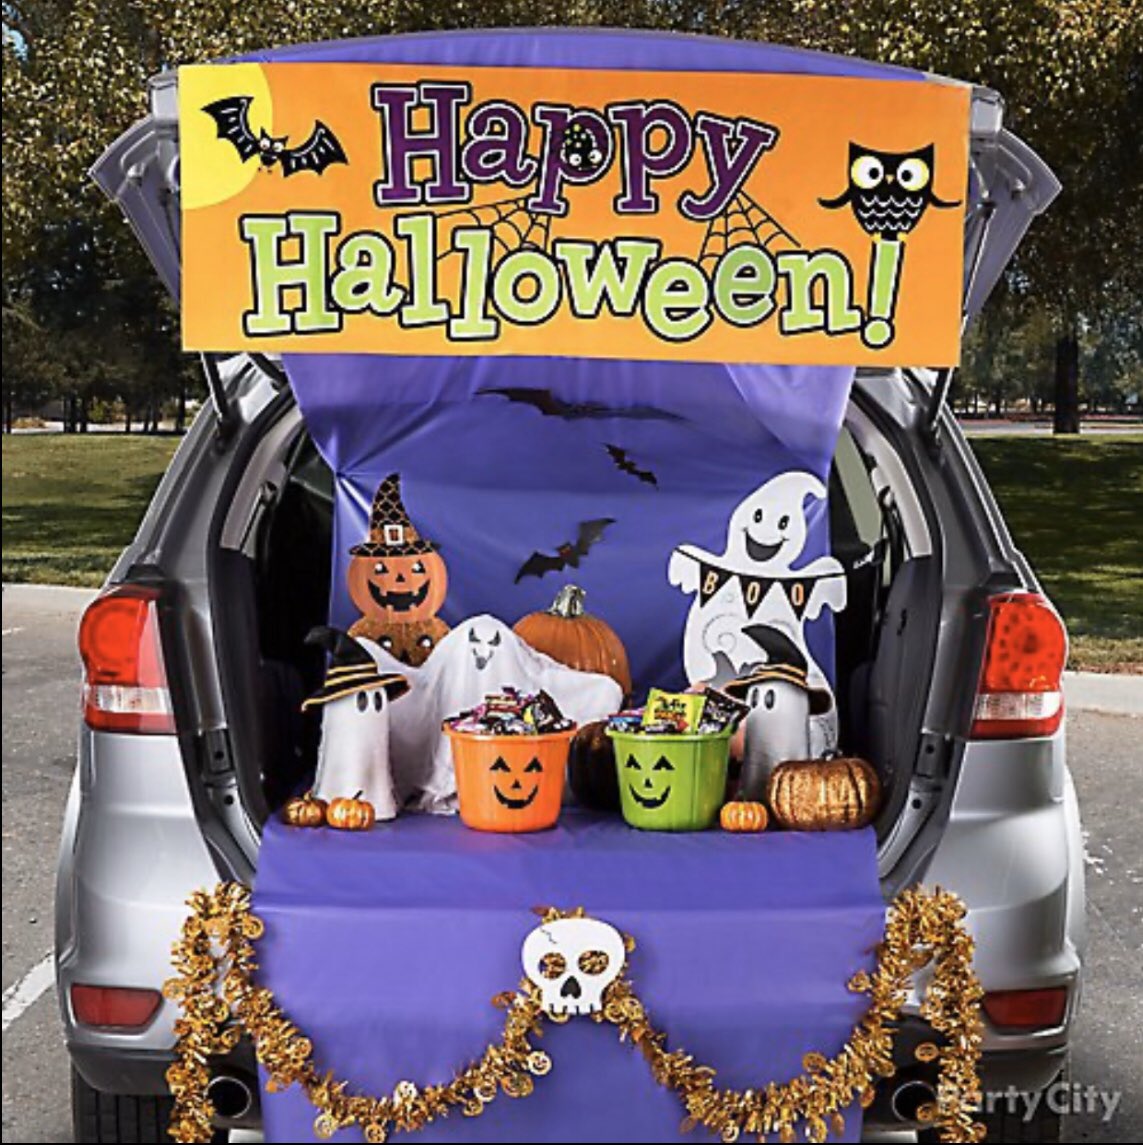 Car trunk with Halloween decor and treats.